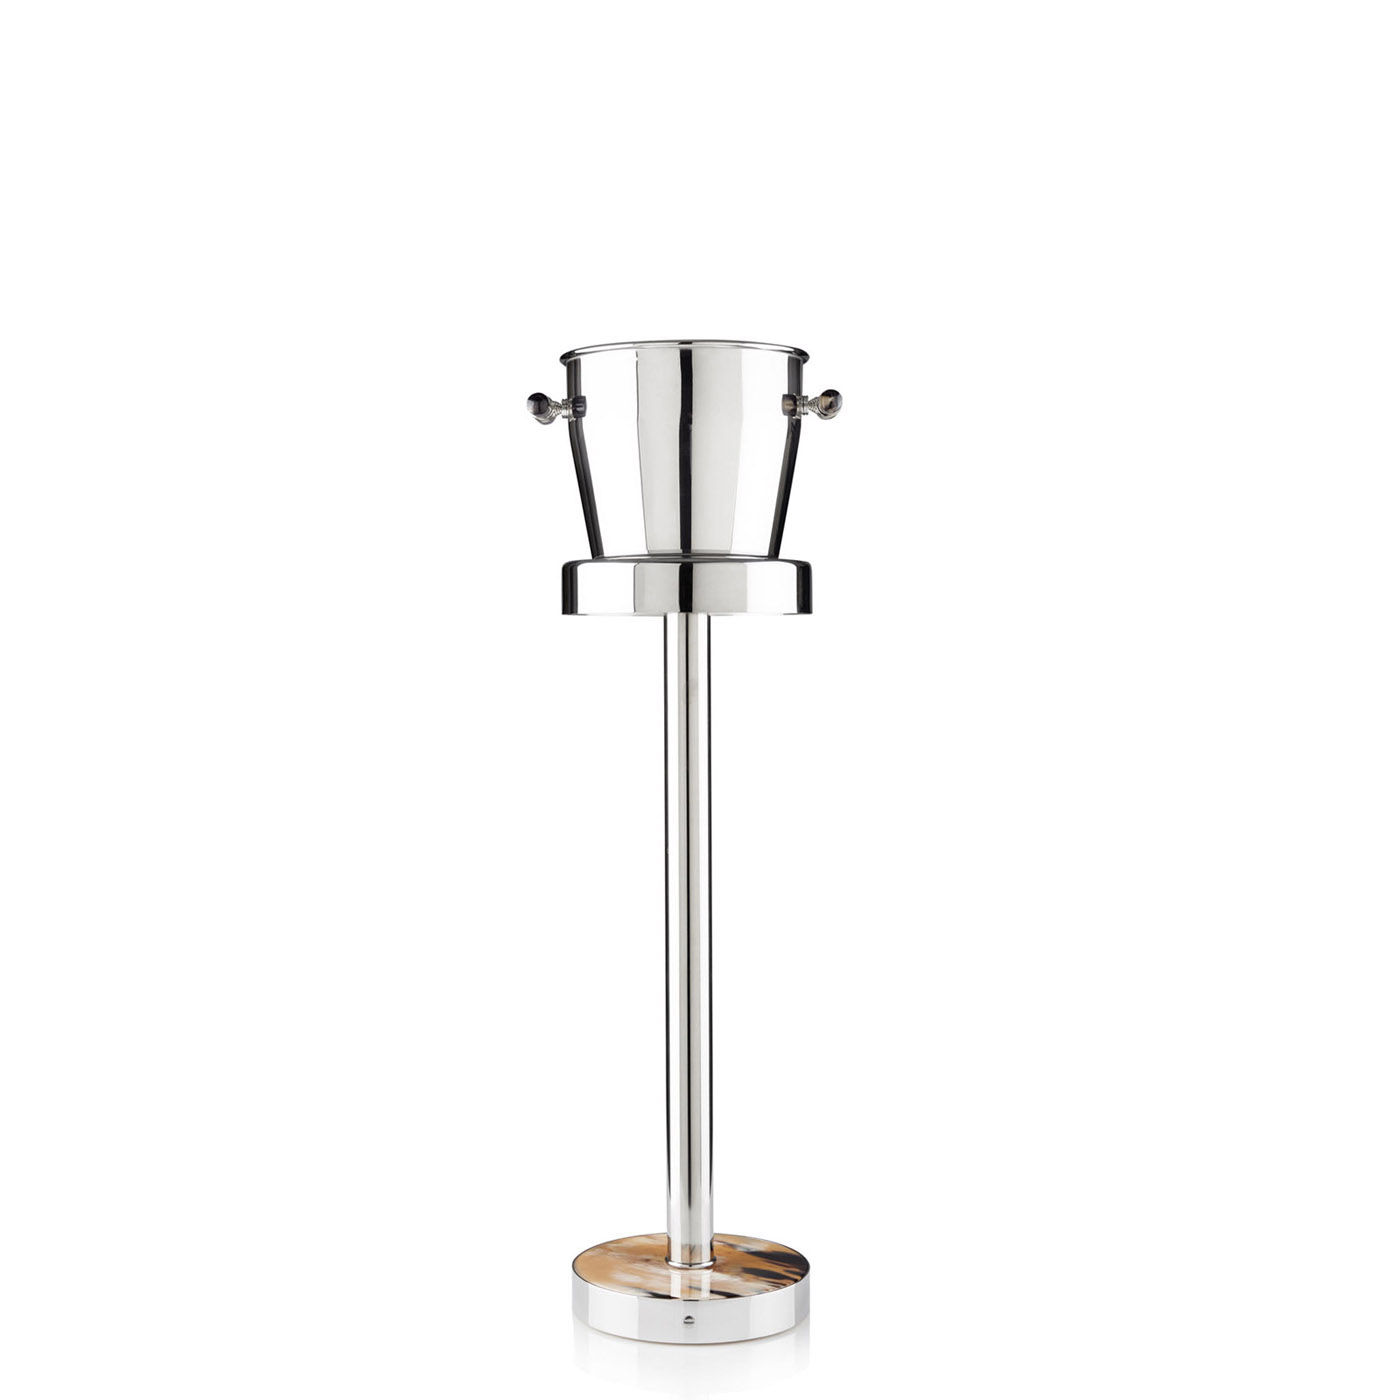 Tableware - Artica wine cooler with portable stand - Arcahorn